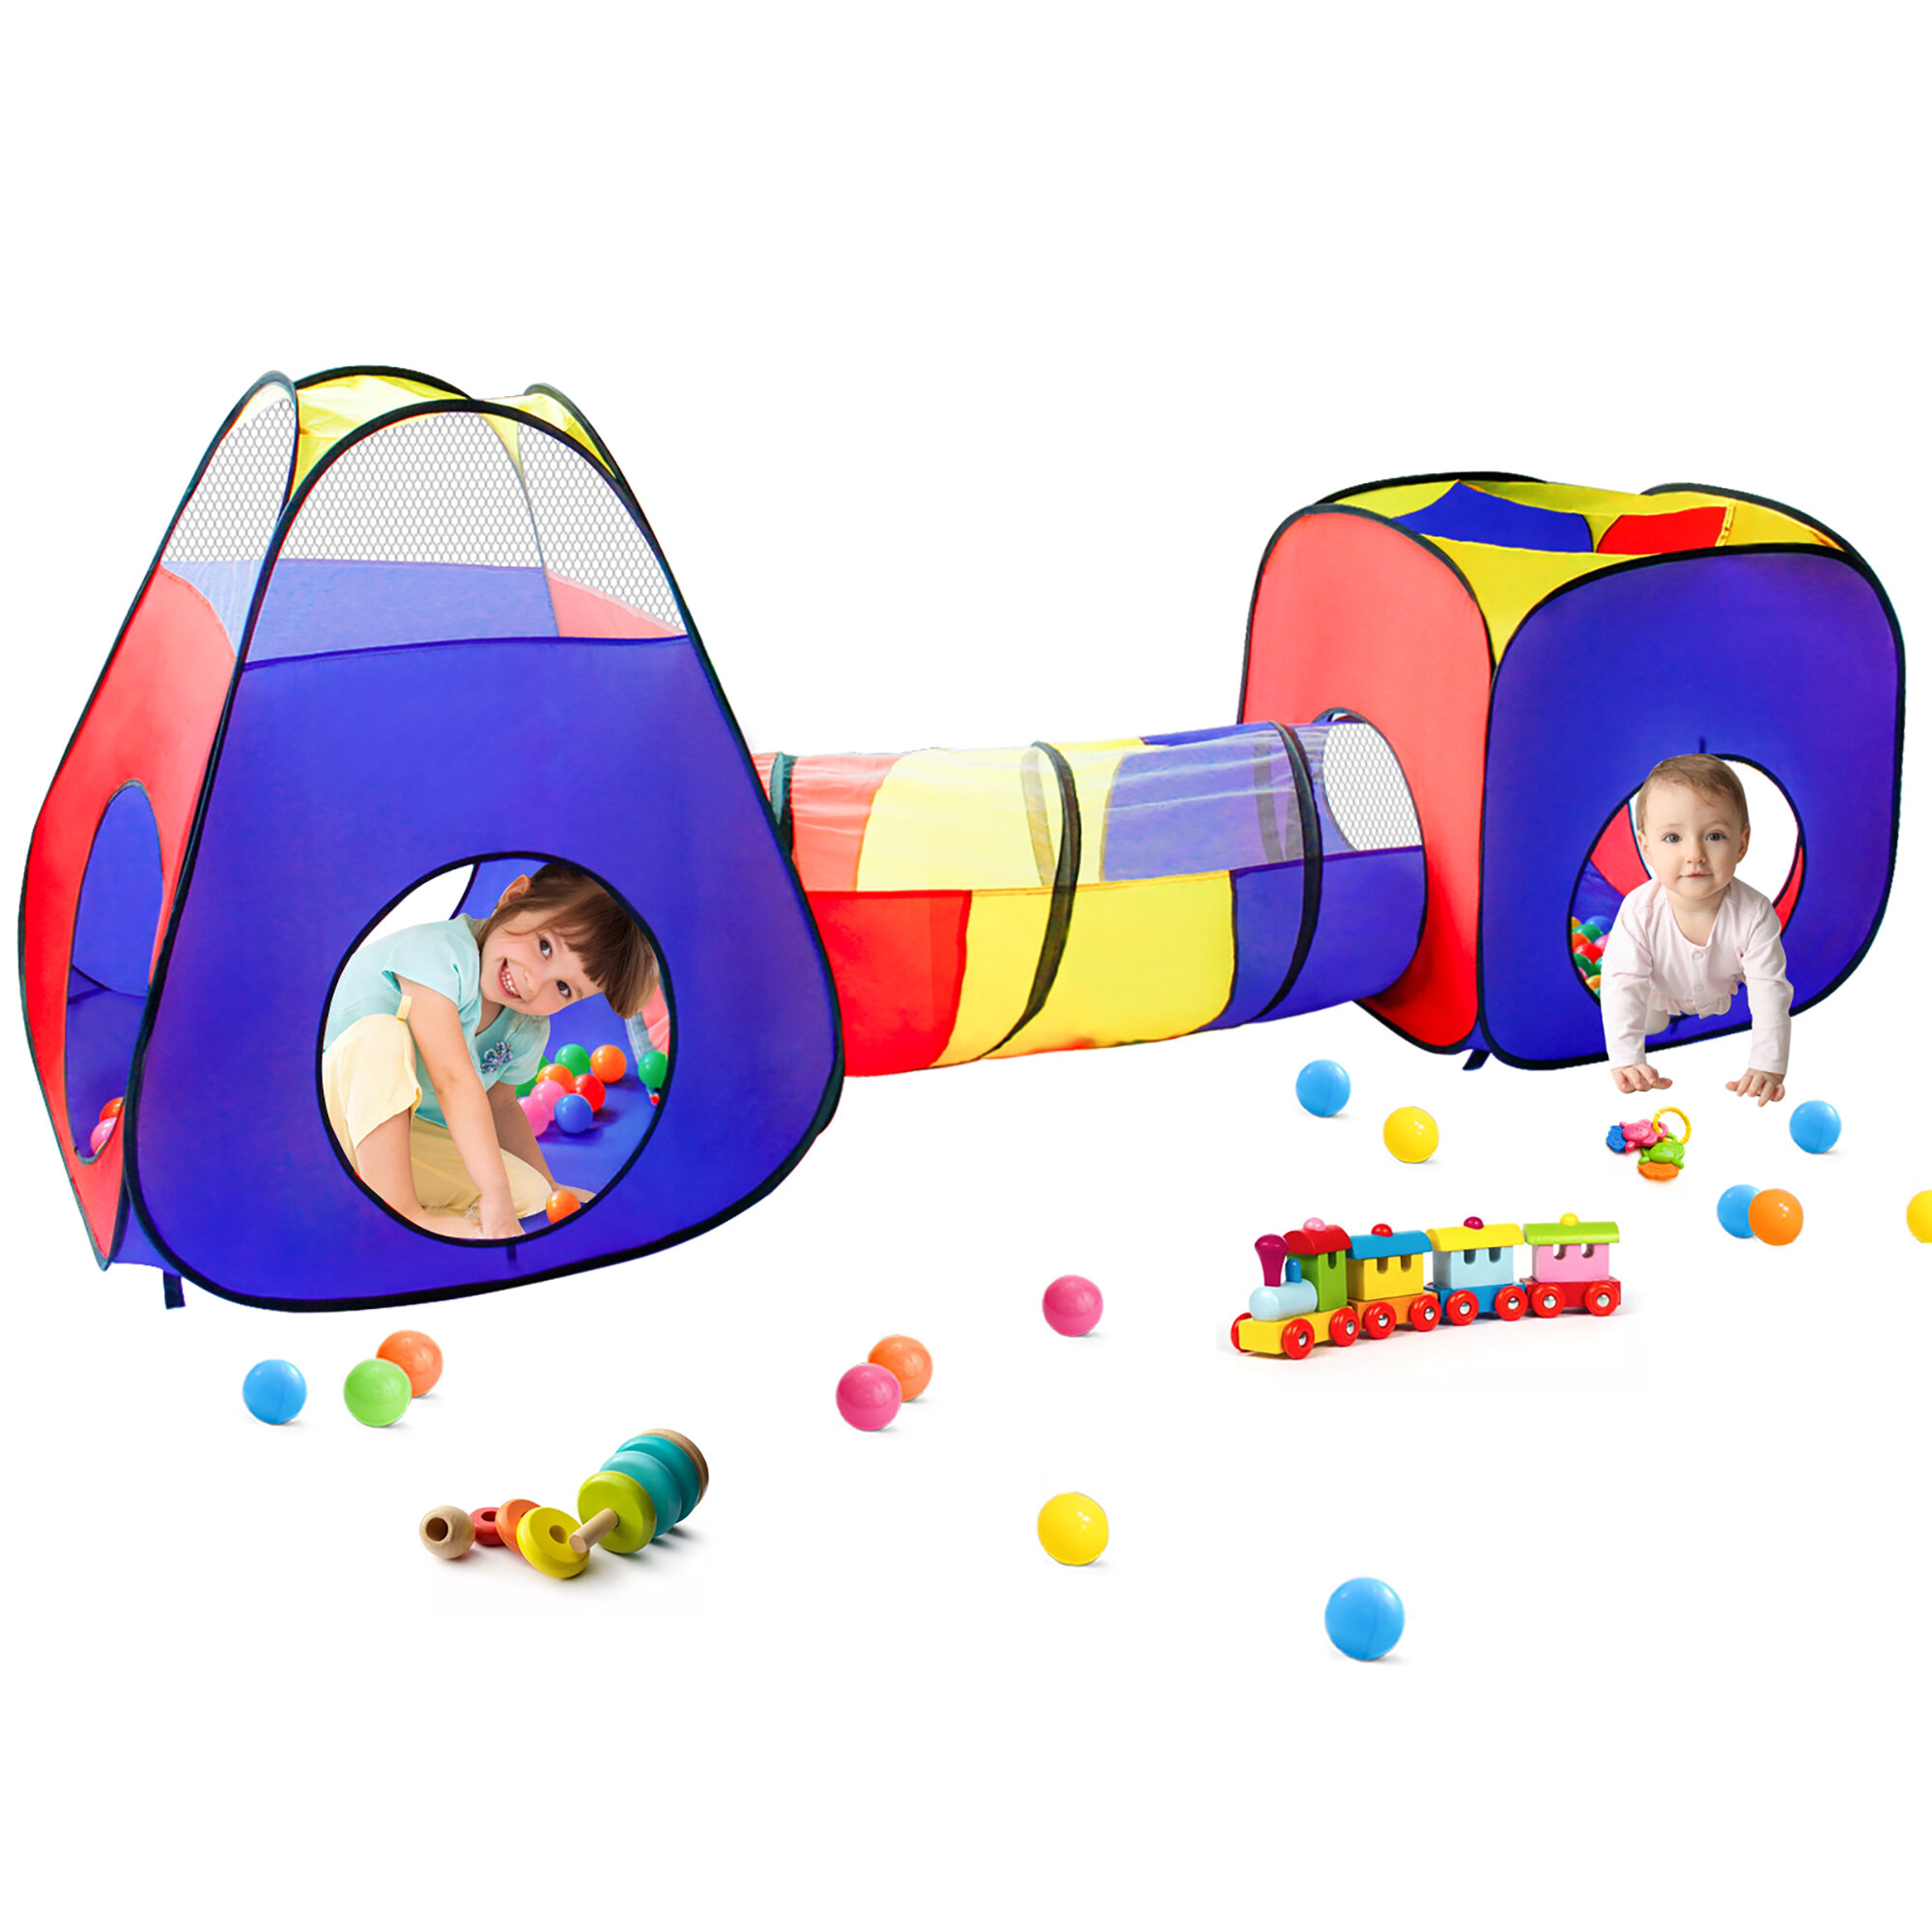 3 IN 1 CHILDREN KIDS BABY PET PLAY TENT TUNNEL BALL PIT PLAYHOUSE POP UP TENT UK 